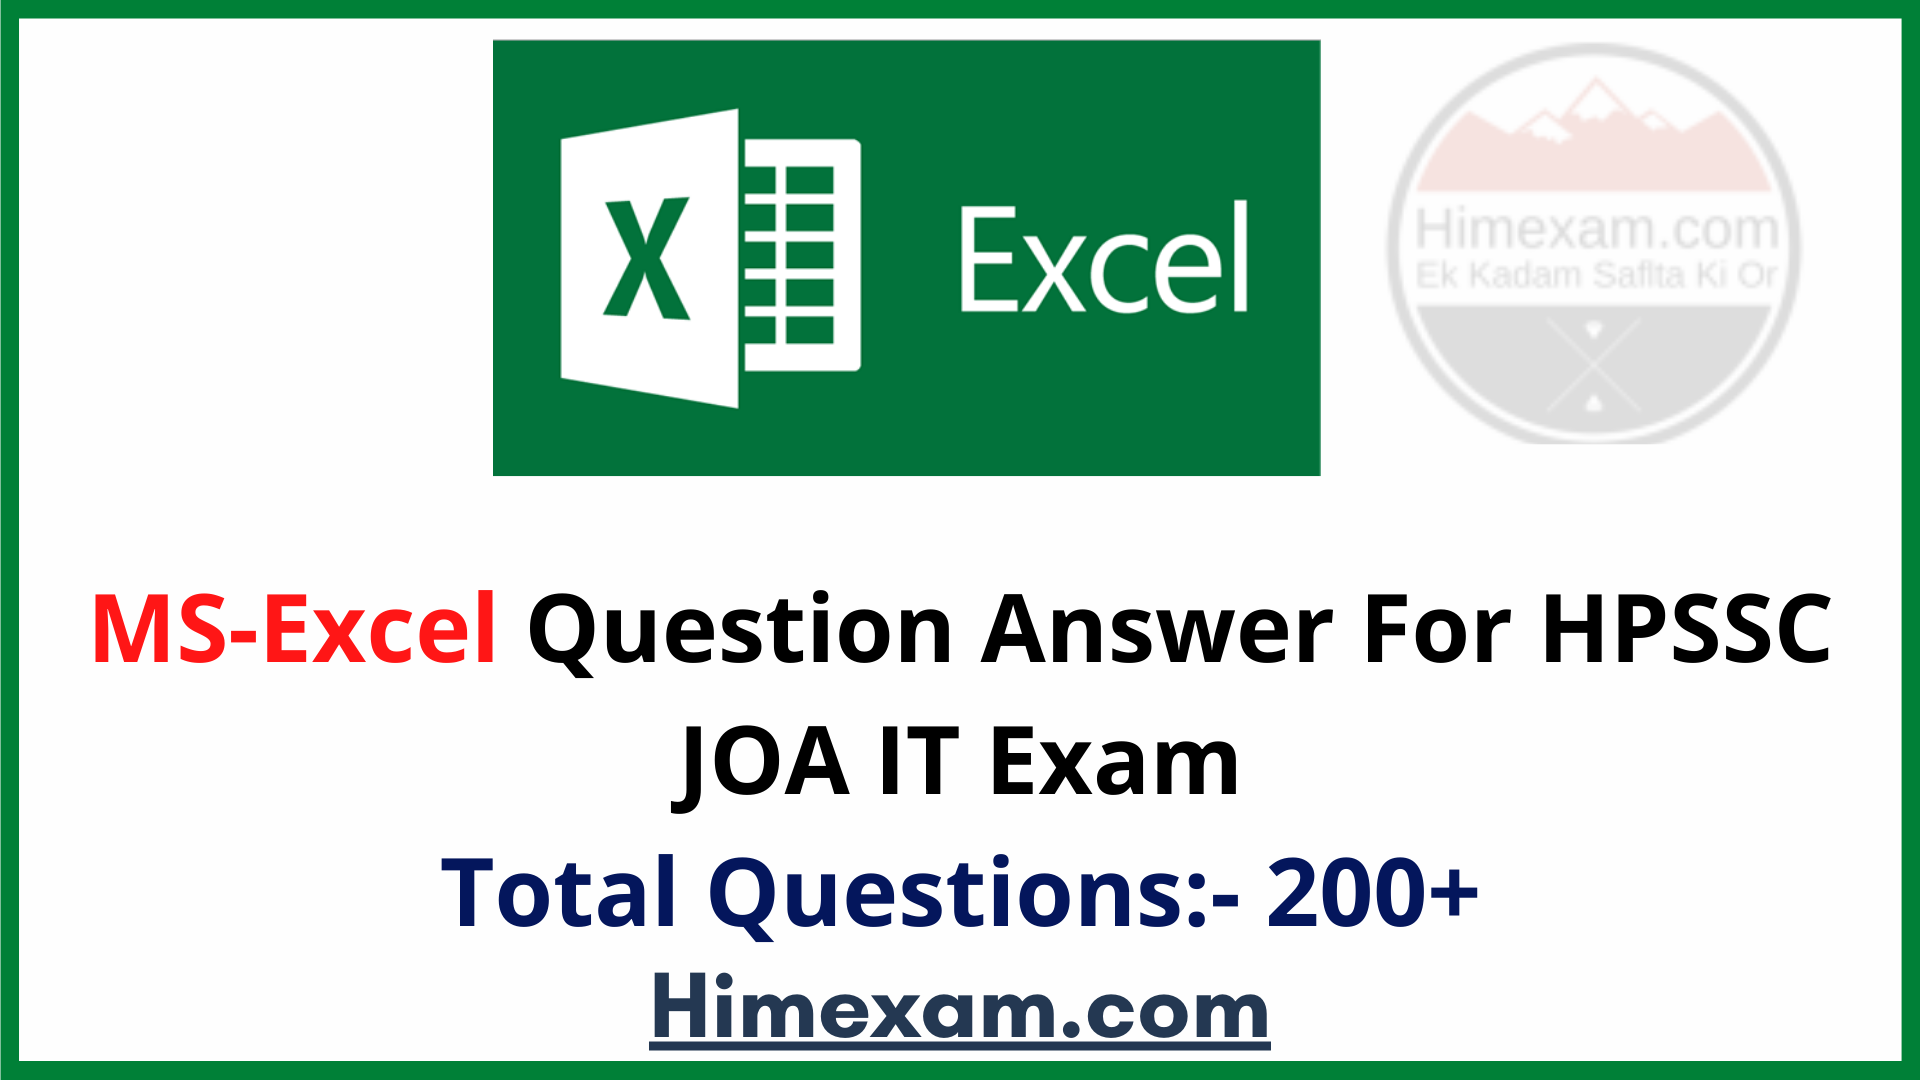 MS-Excel Question Answer For HPSSC JOA IT Exam